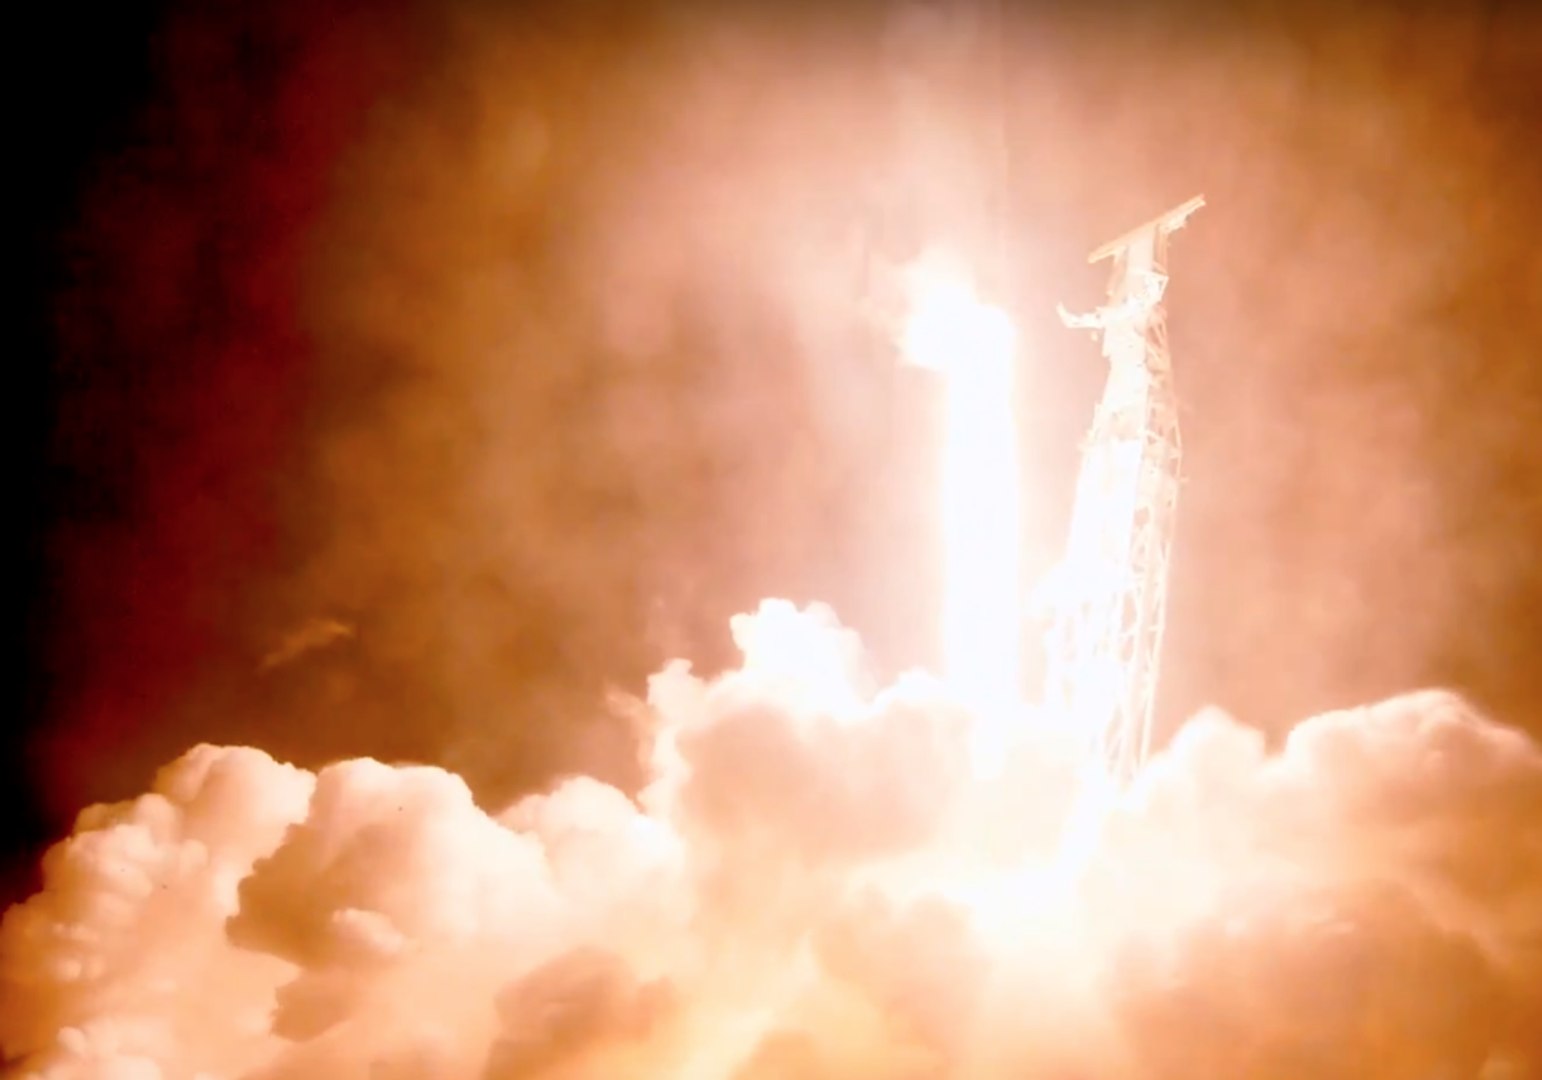 SpaceX has launched two broadband satellites, providing Internet service to people in underserved ar